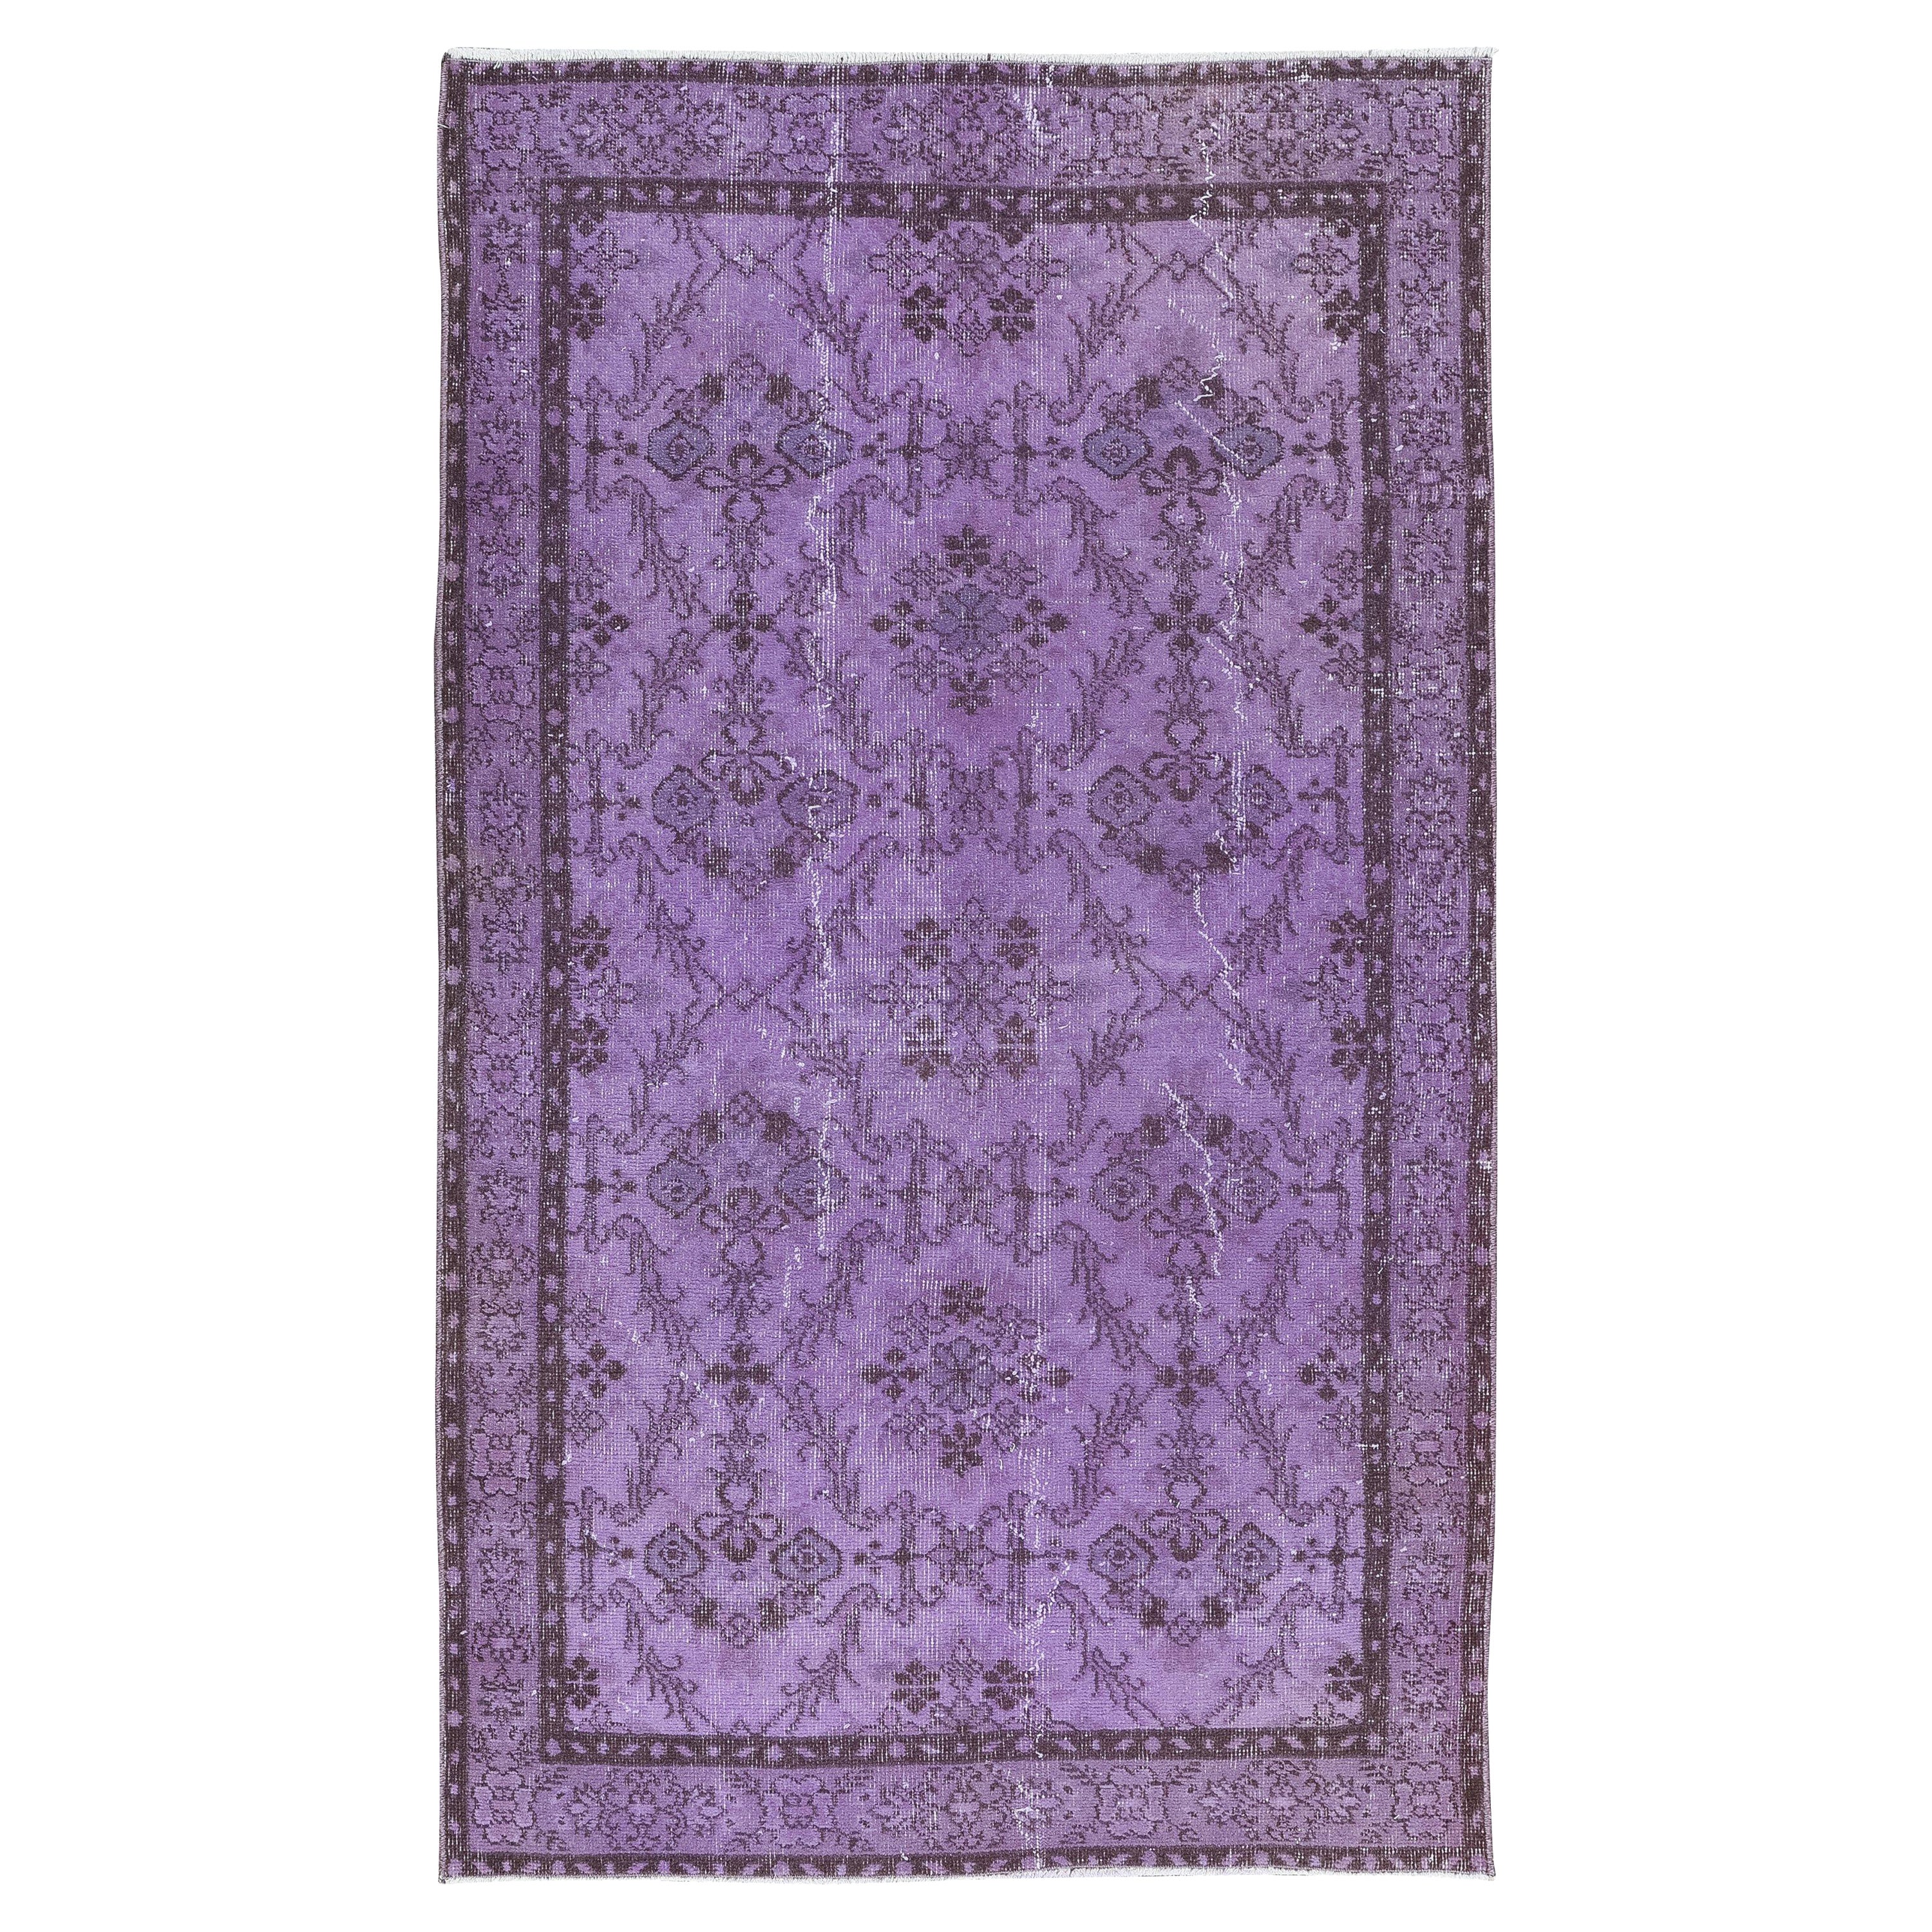 4x6.5 Ft Turkish Handmade Accent Rug in Purple, Great for Modern Interiors For Sale